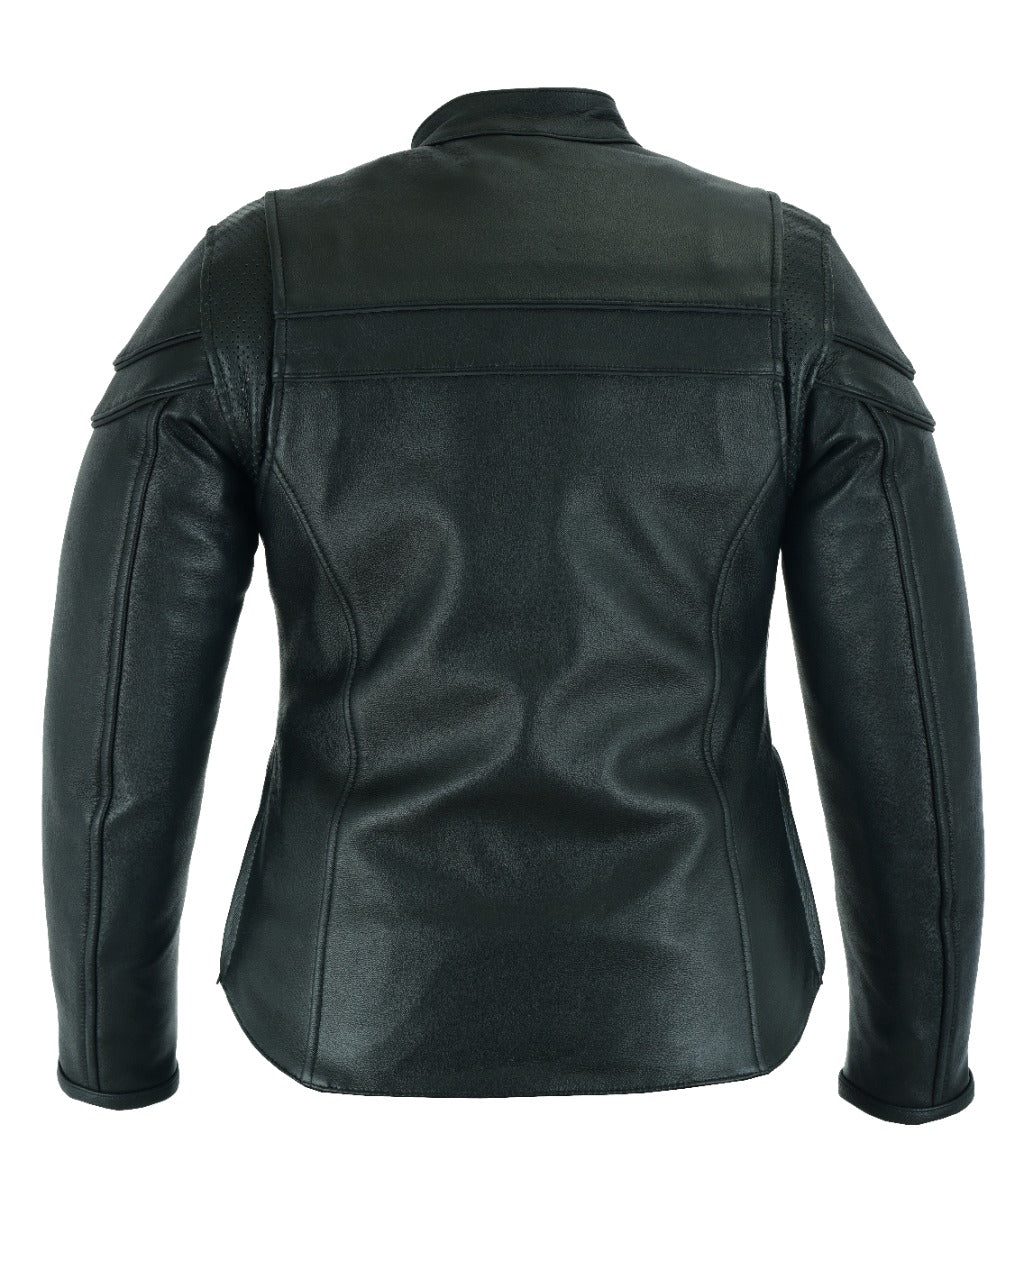 Ladies Racer Jacket with Zip Out Liner